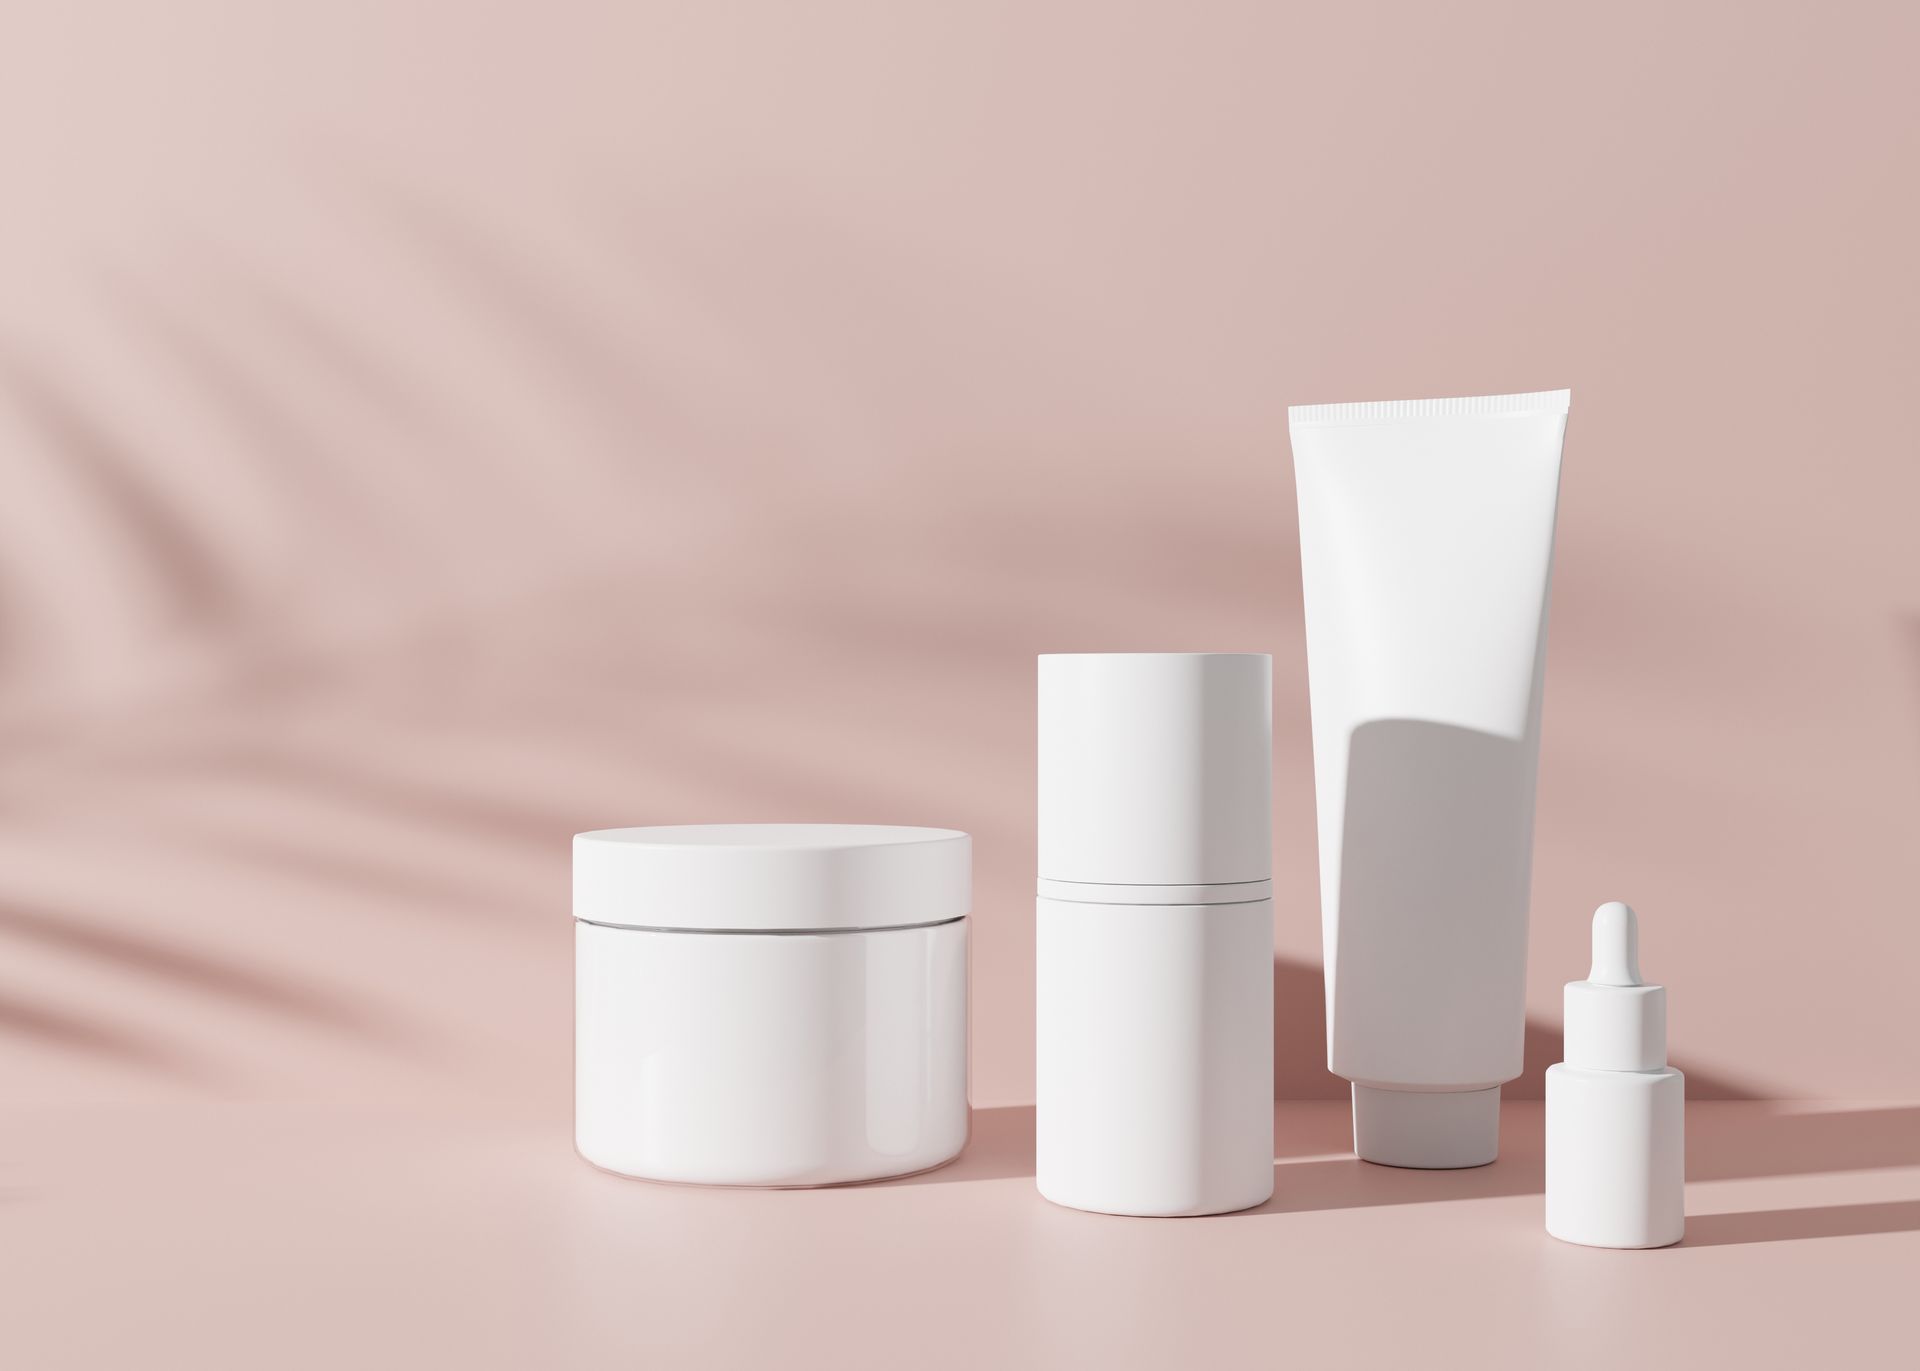 skincare products on pink background